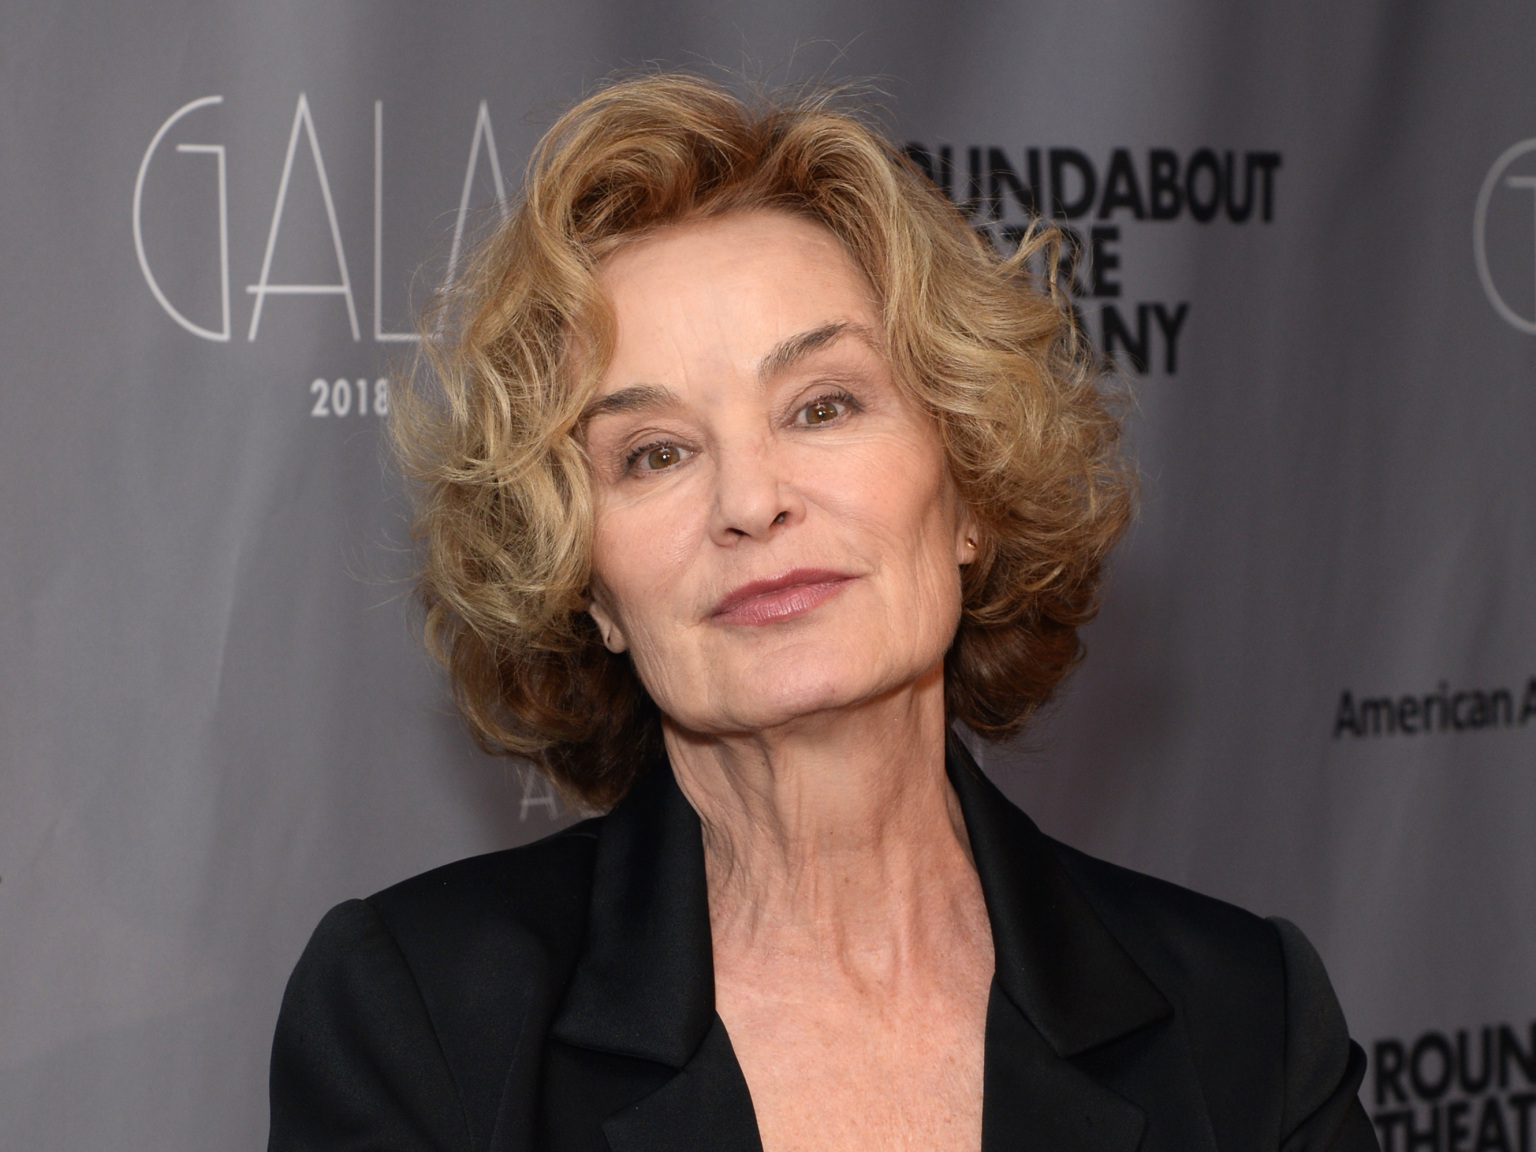 Jessica Lange Wiki, Bio, Age, Net Worth, and Other Facts